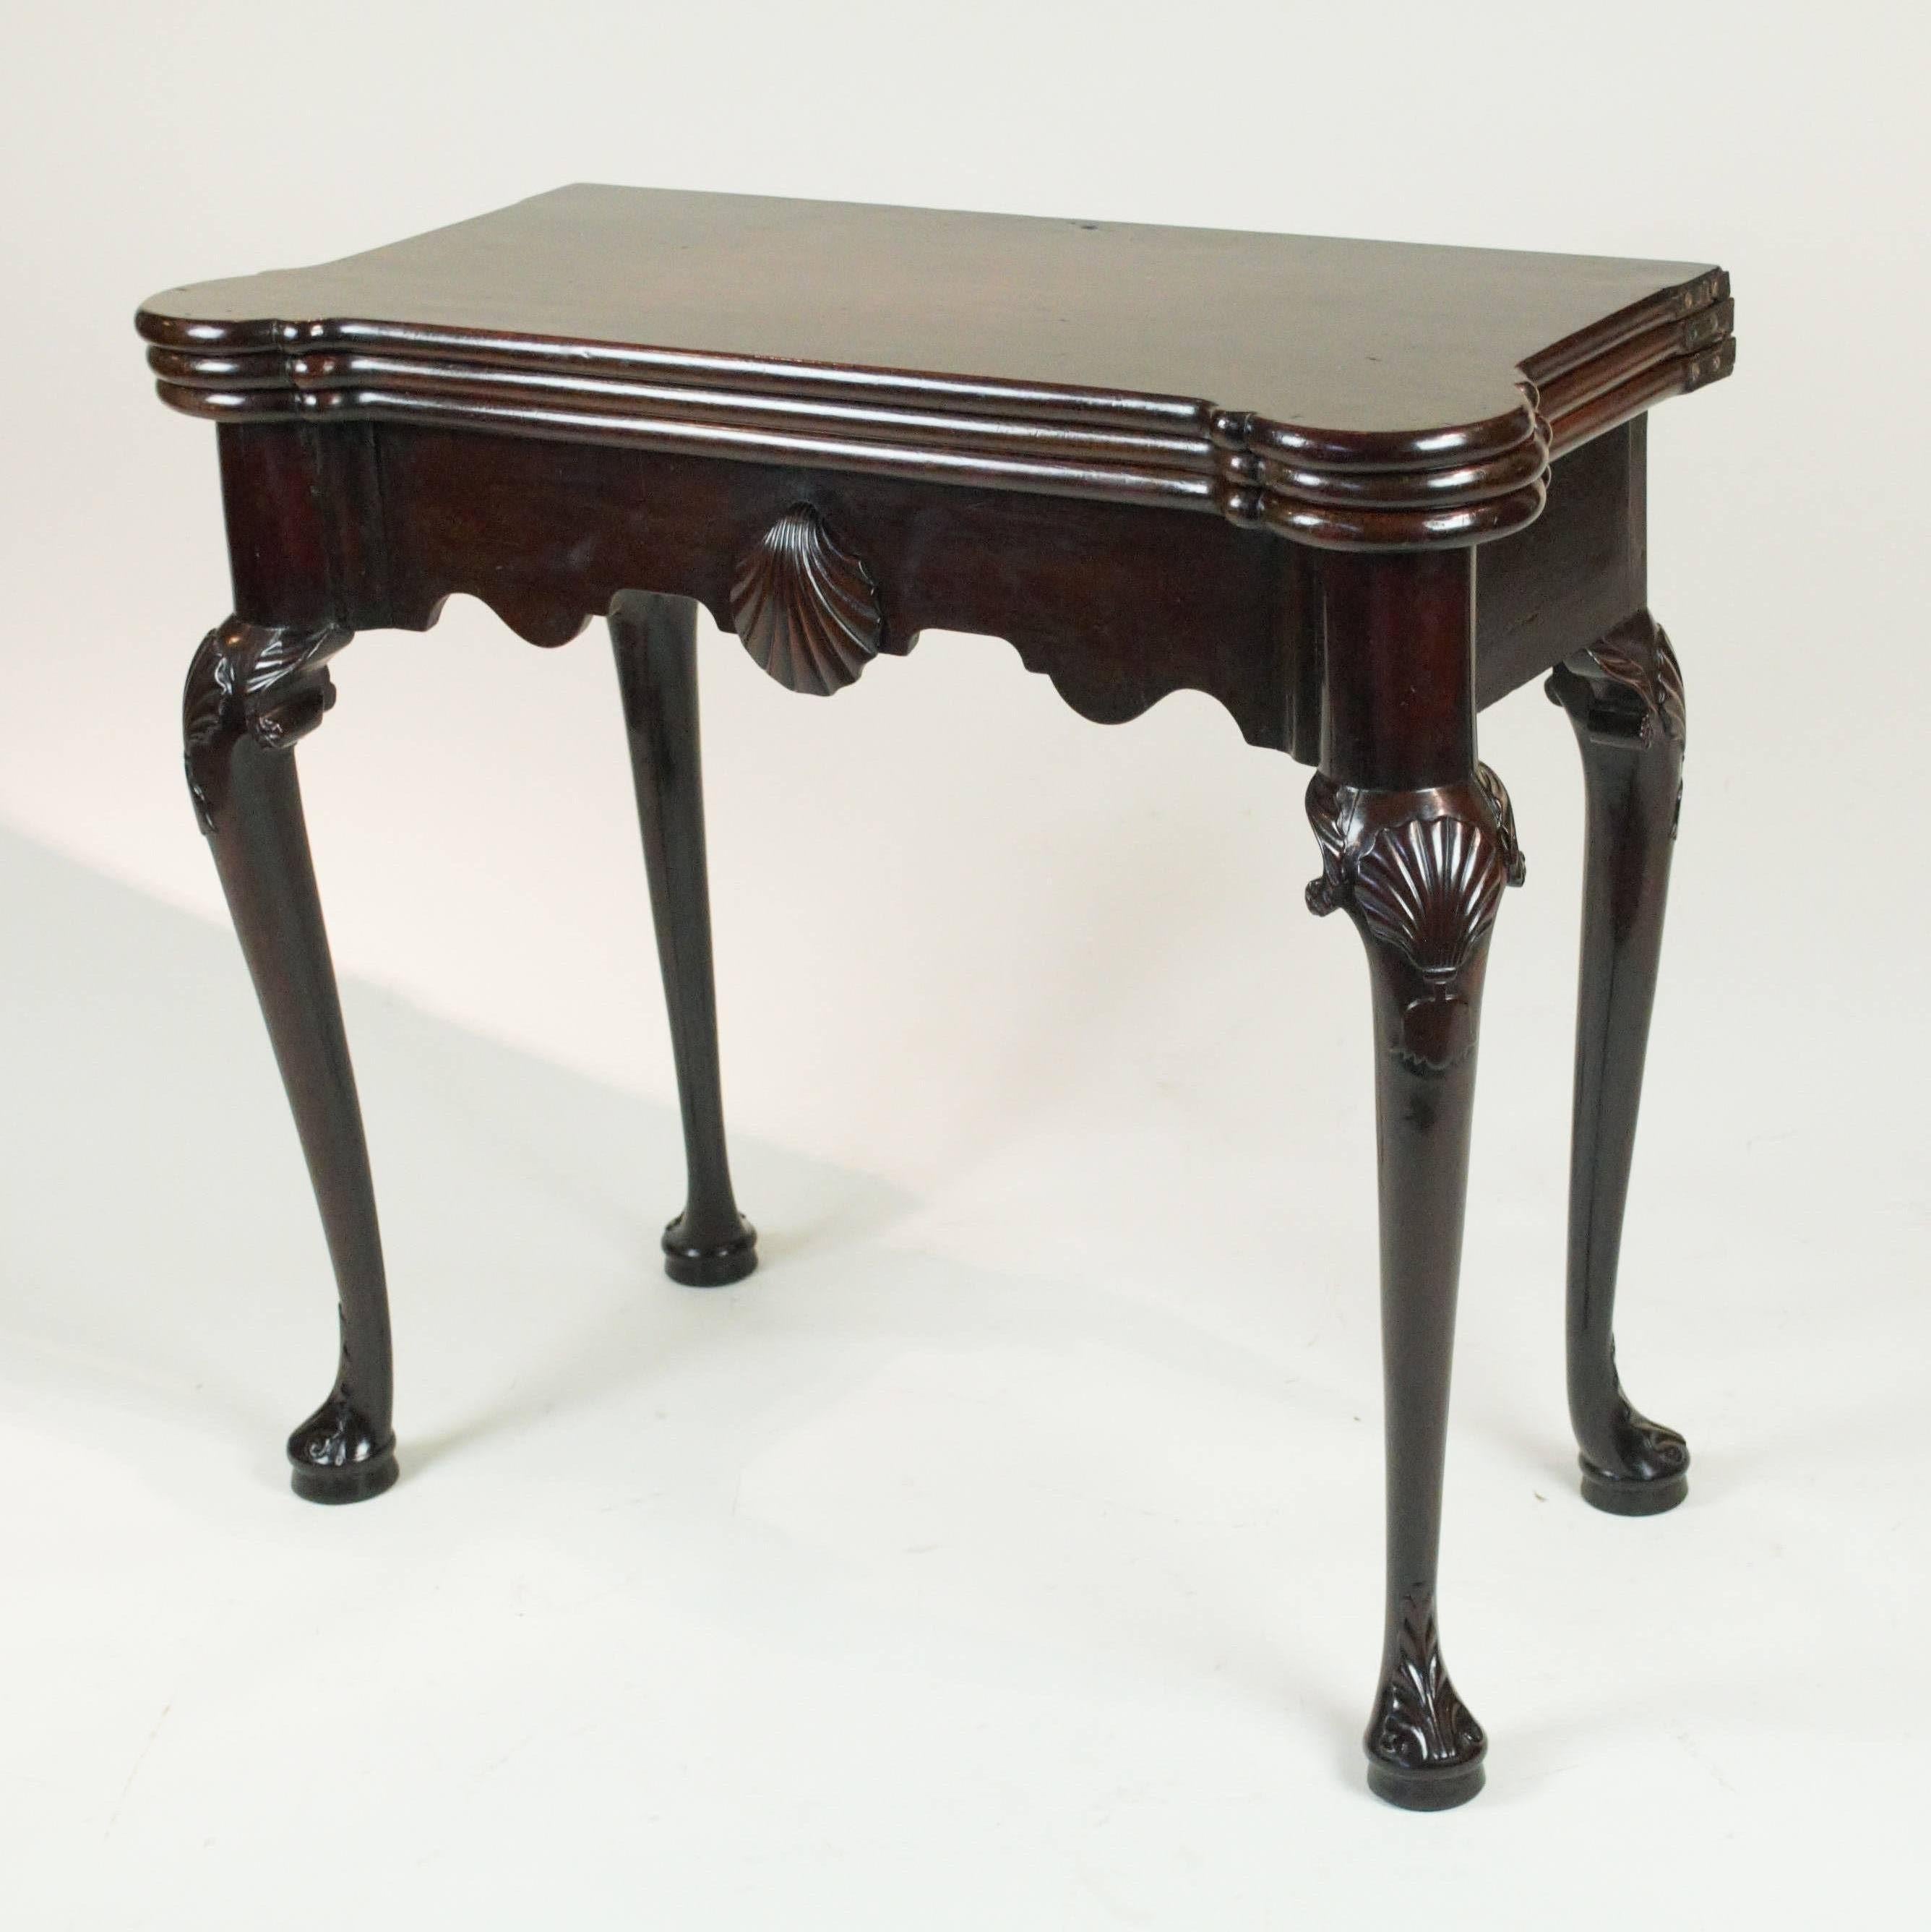 An exceptional and rare mid-18th century Cuban mahogany Irish "castle-top" card and tea table. The shaped top consisting of three flaps which fold open to create either a tea table or a baize-lined card table with candle-stands and counter